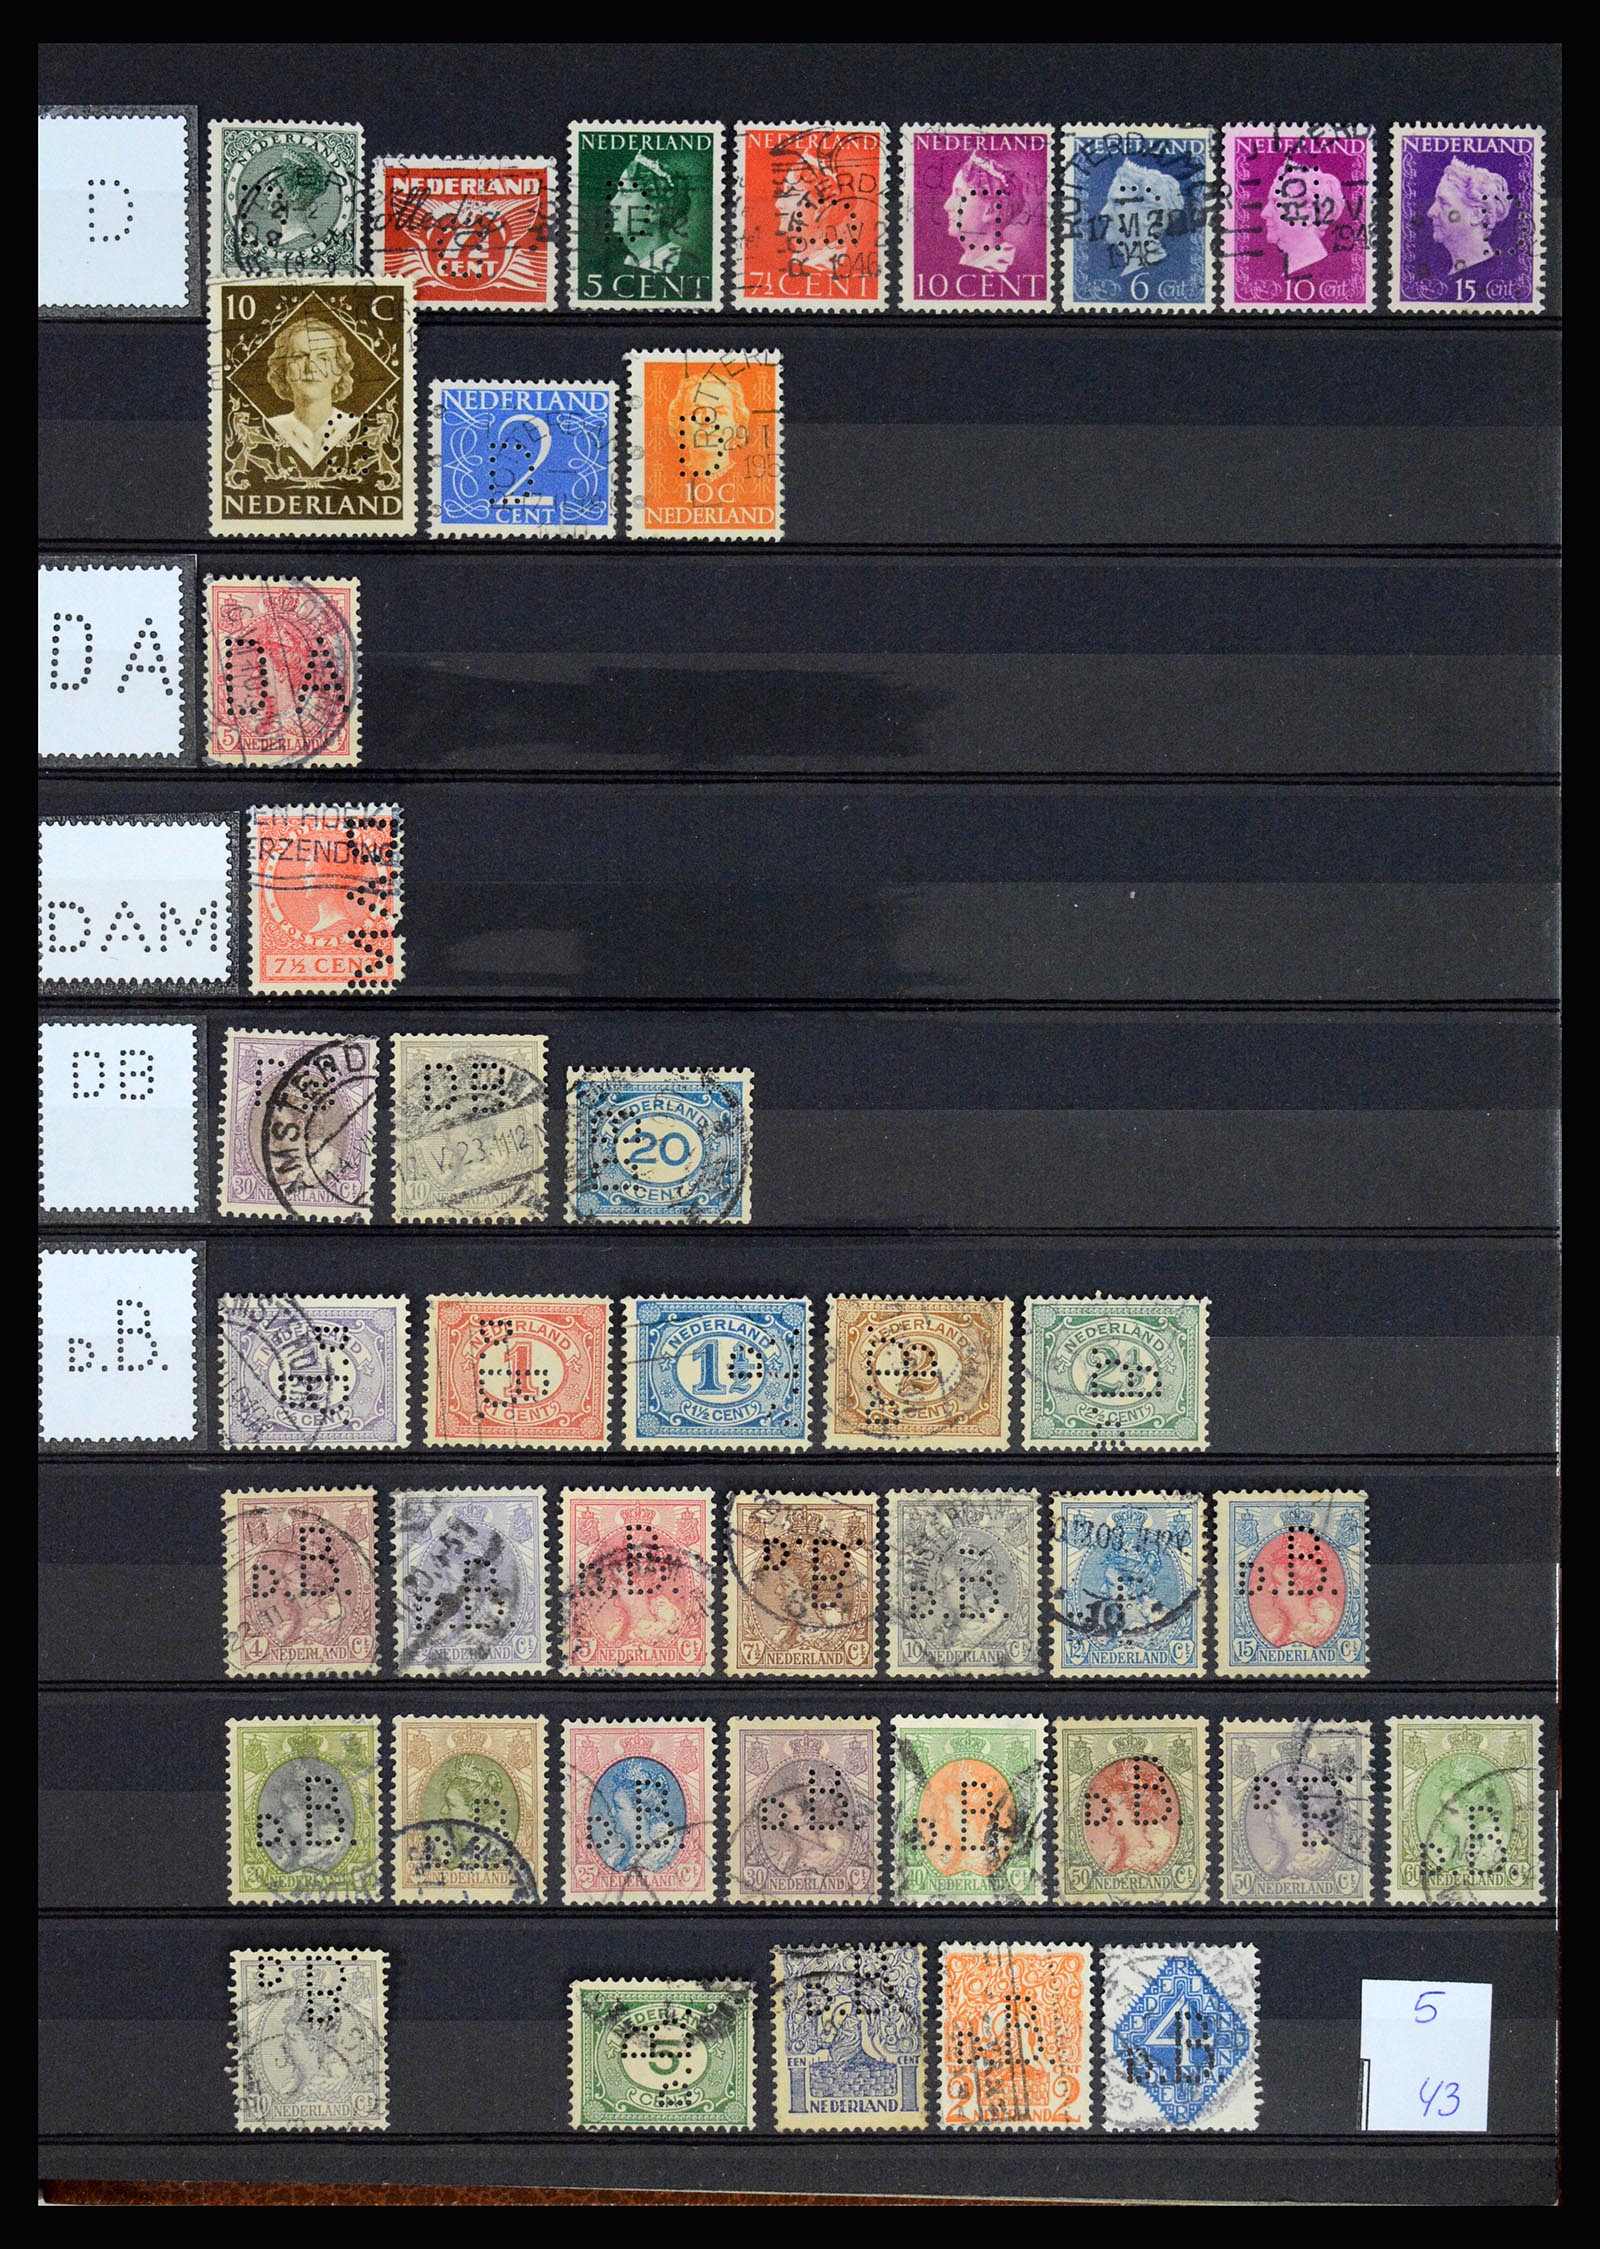 37183 008 - Stamp collection 37183 Netherlands perfins 1872-1960.